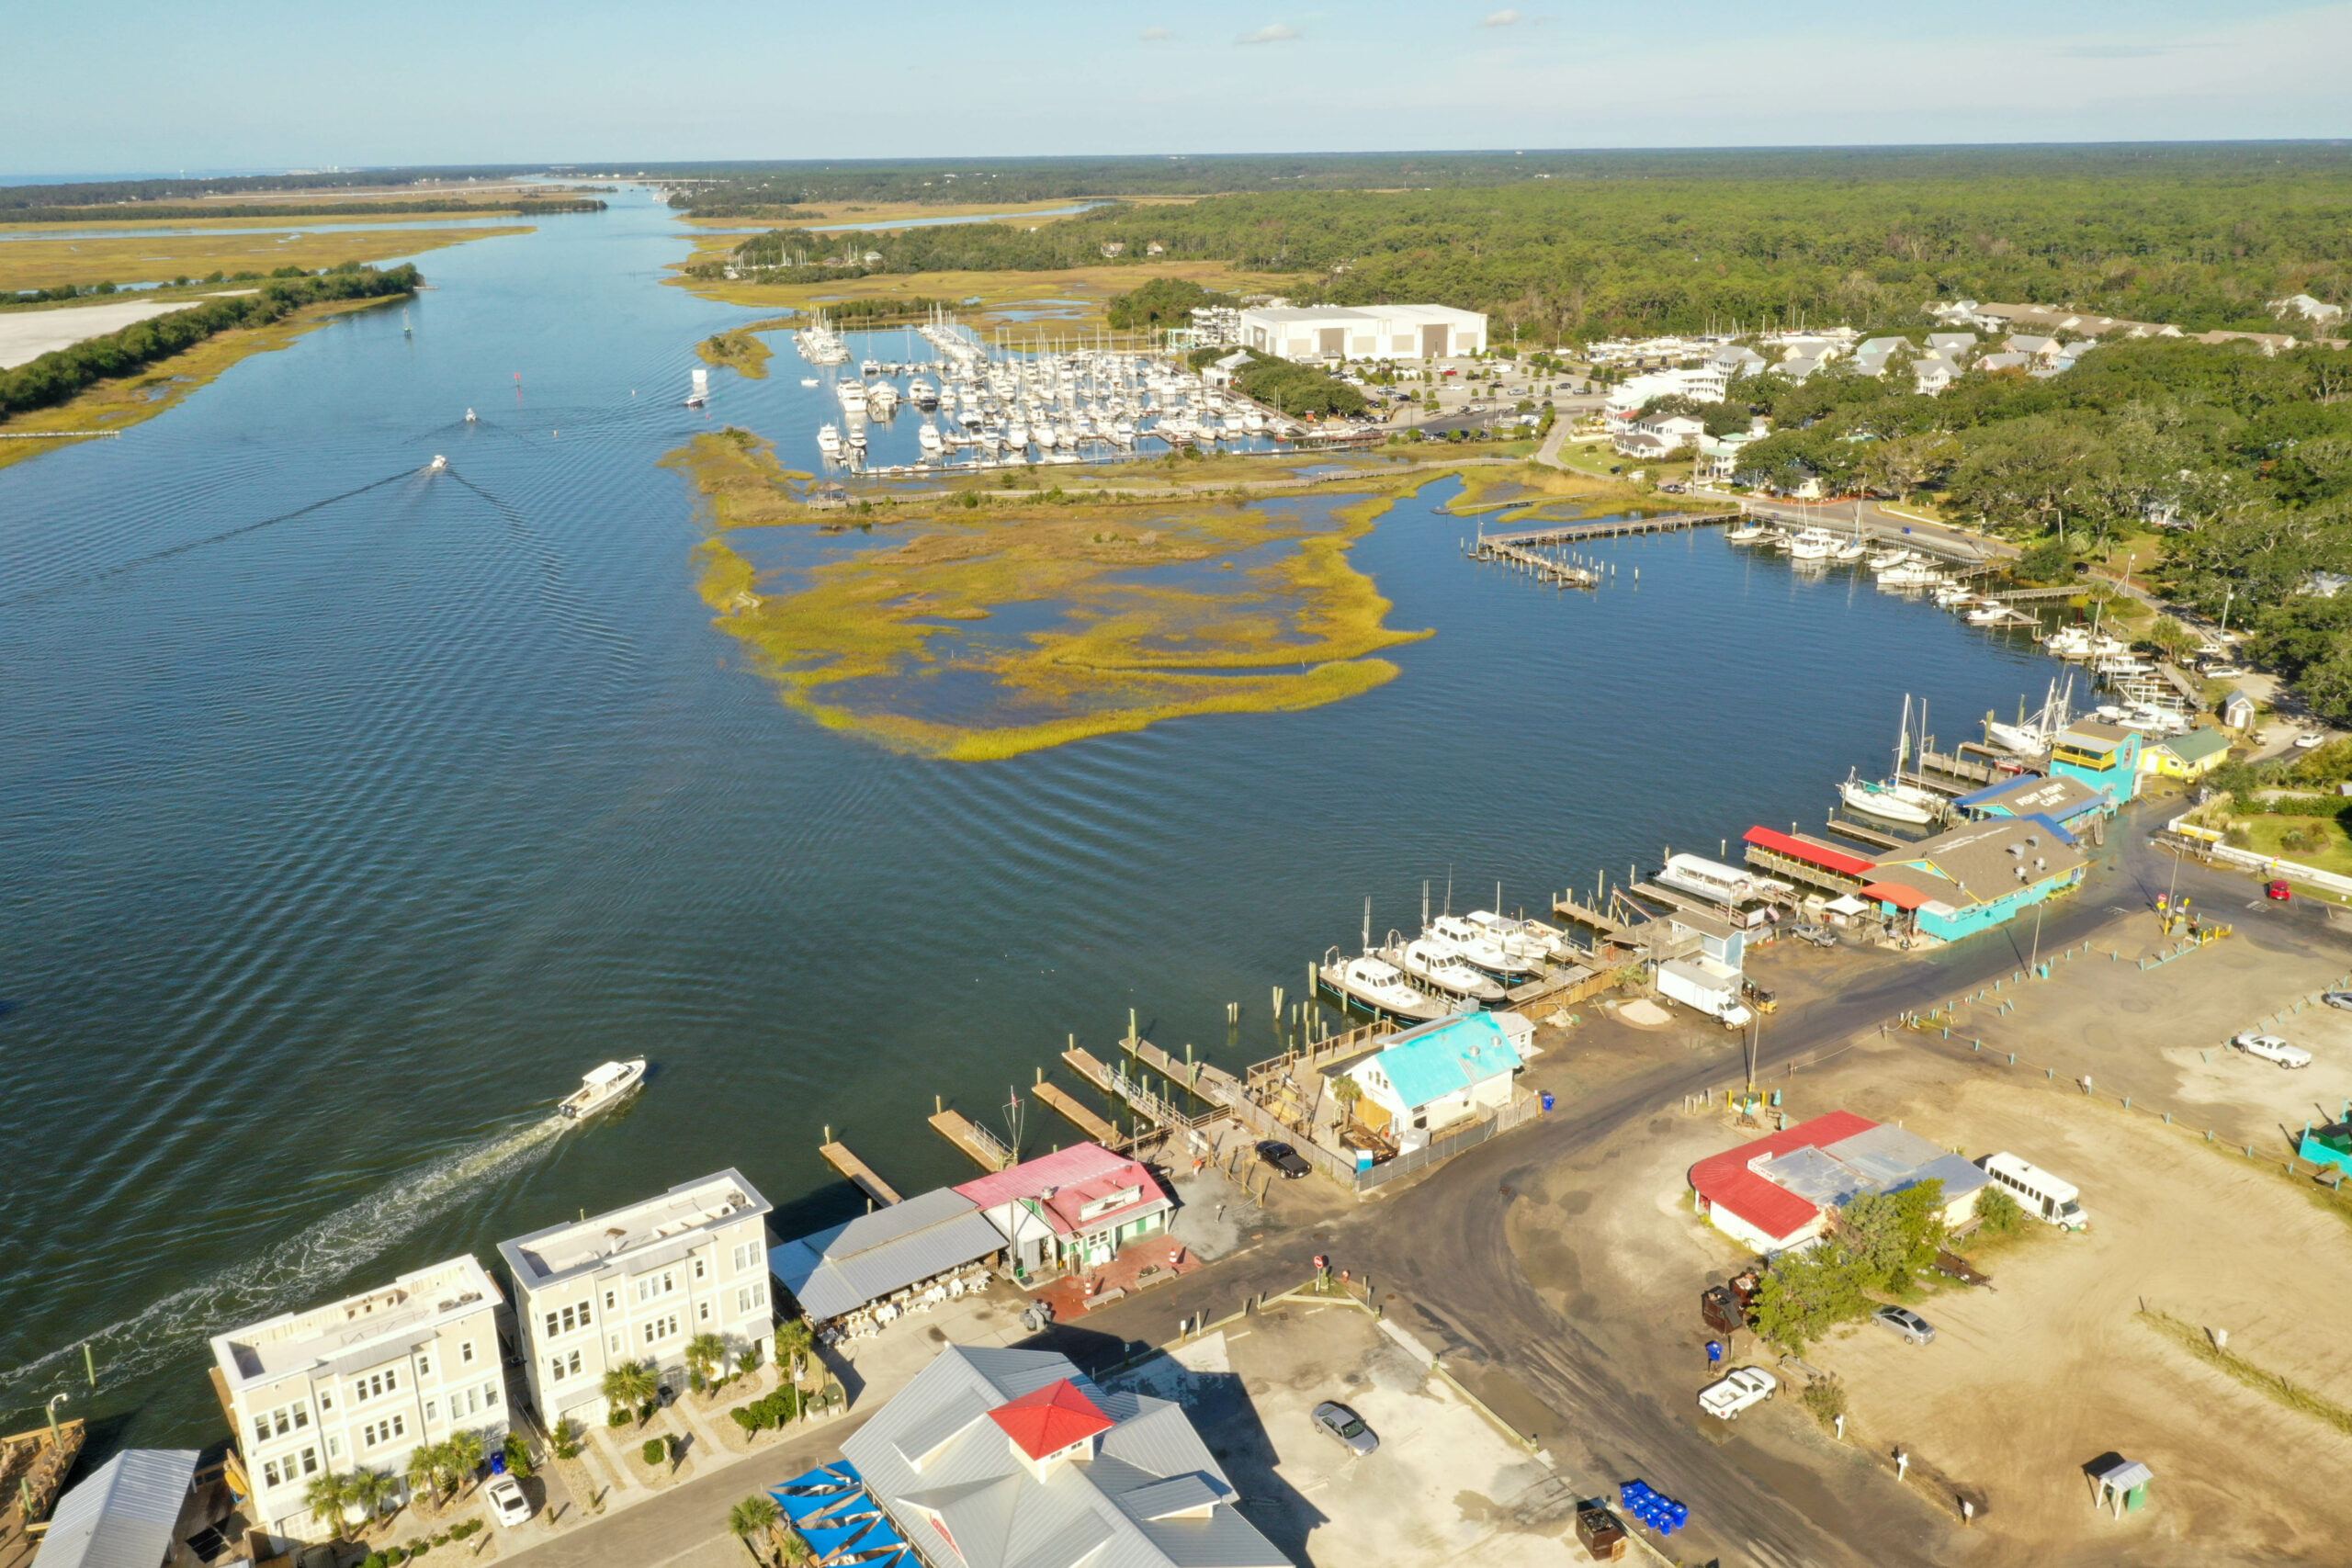 image: aerial view of waterfront marina in Southport, NC.